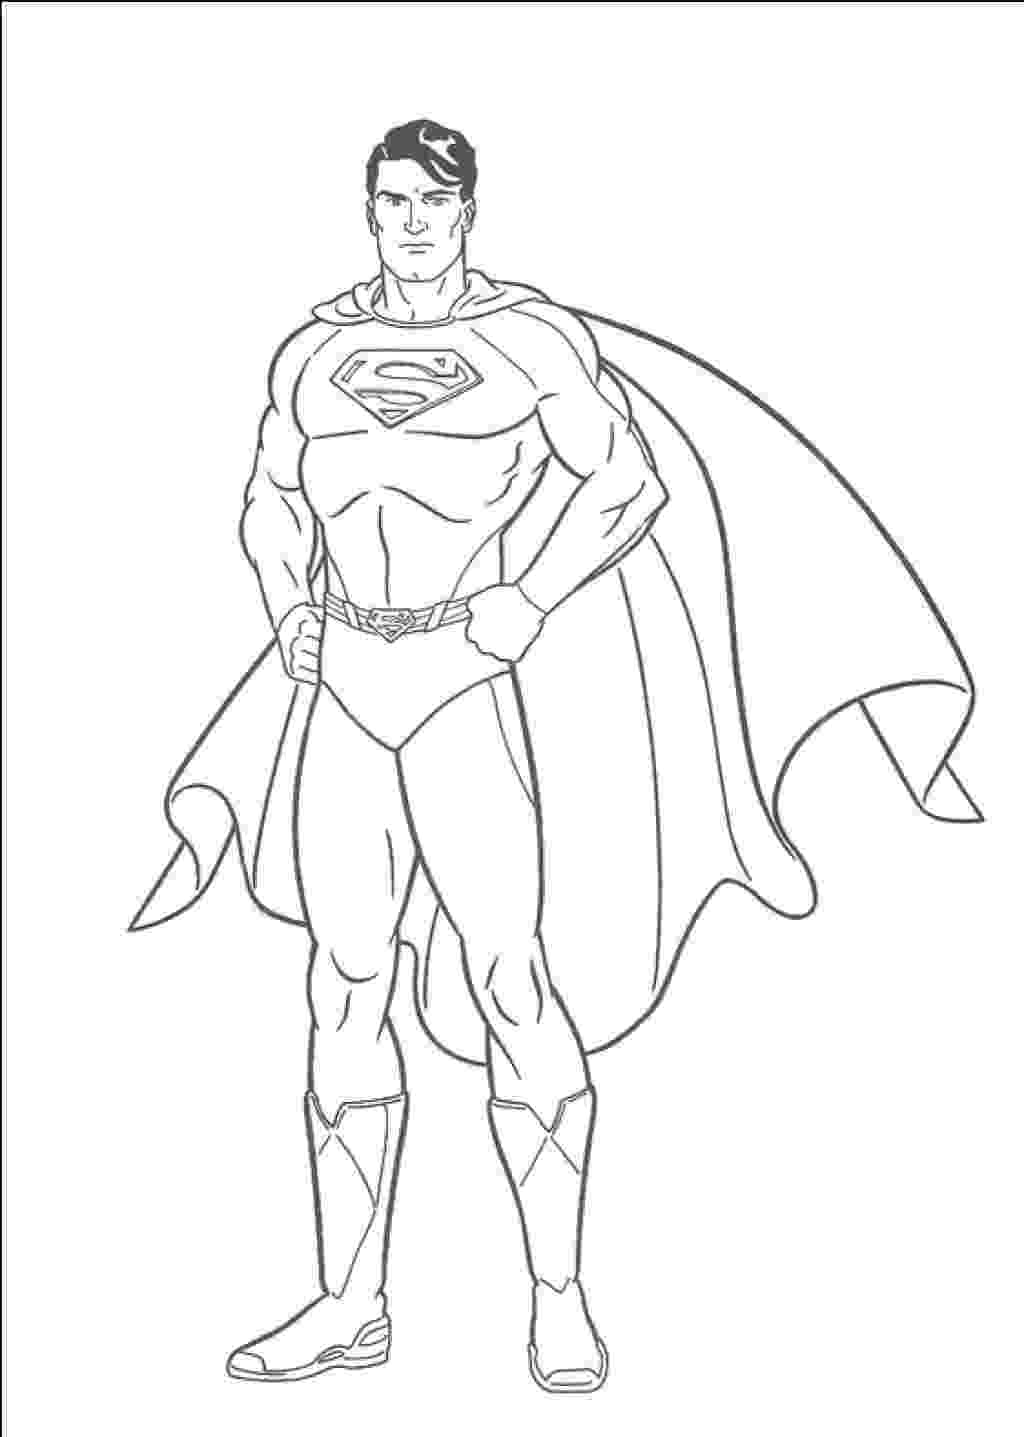 superman coloring pages to print superman coloring pages free printable coloring pages to coloring superman pages print 